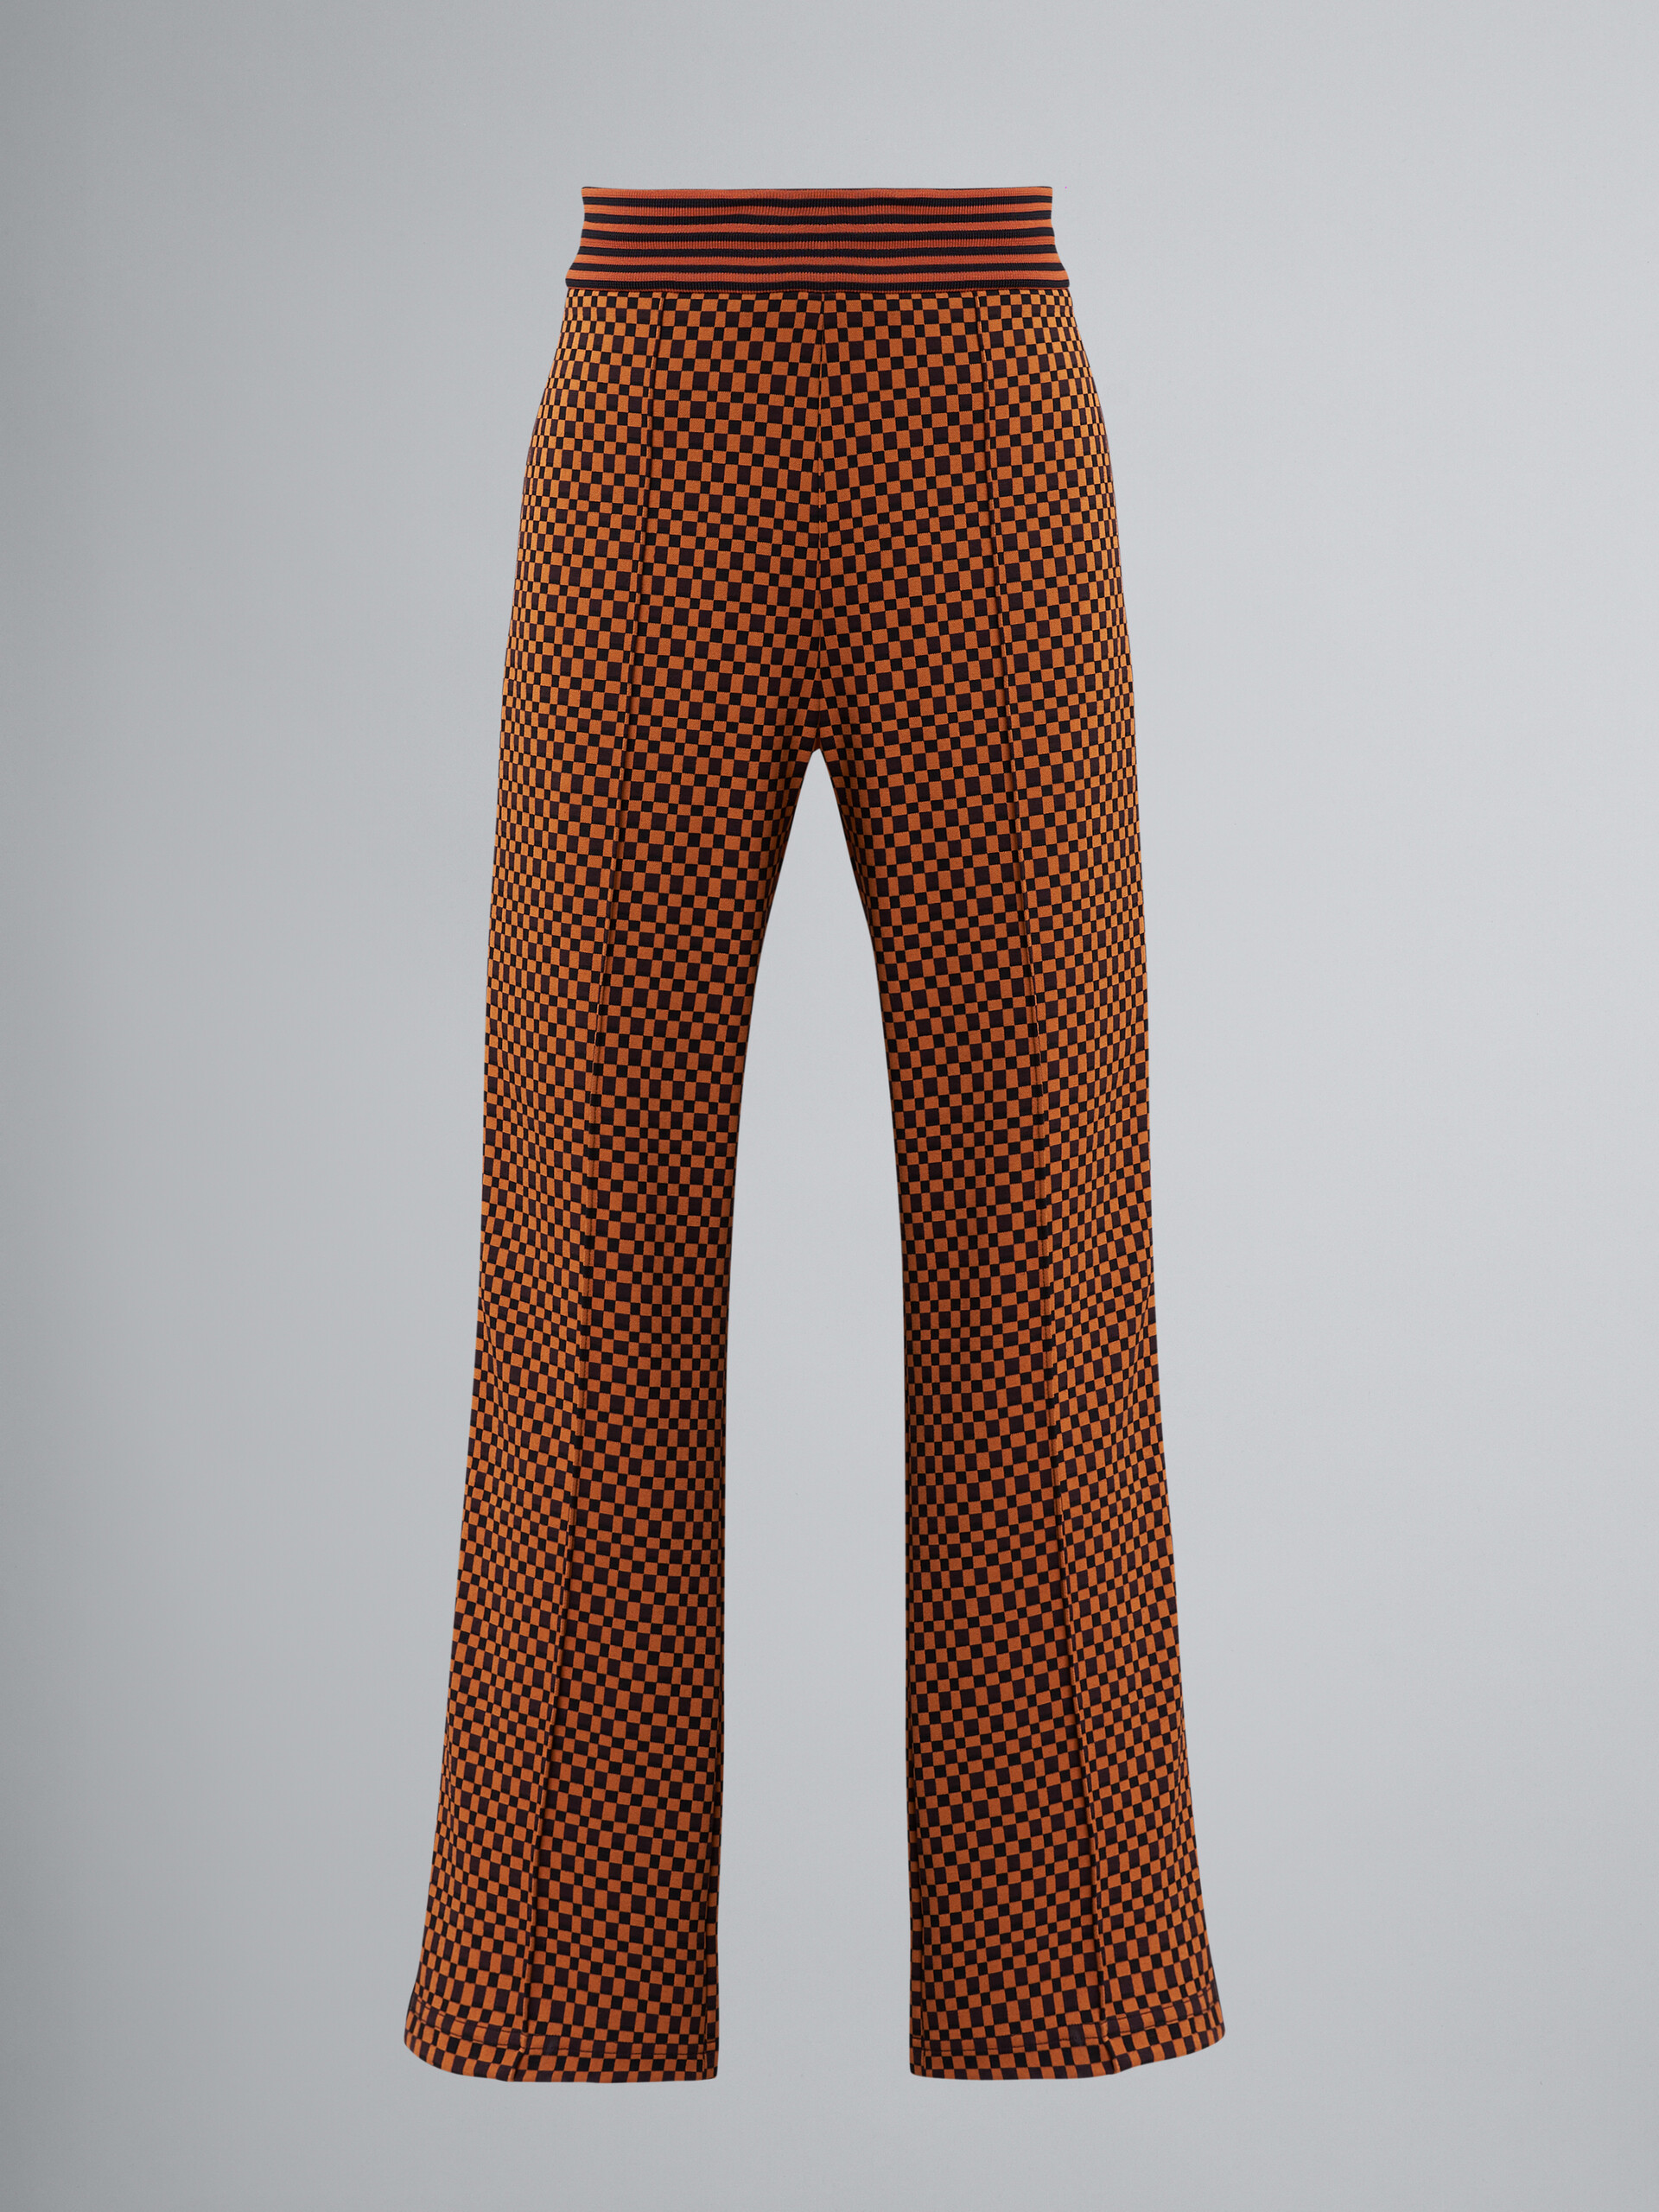 Check jacquard jersey track trousers - Pants - Image 1